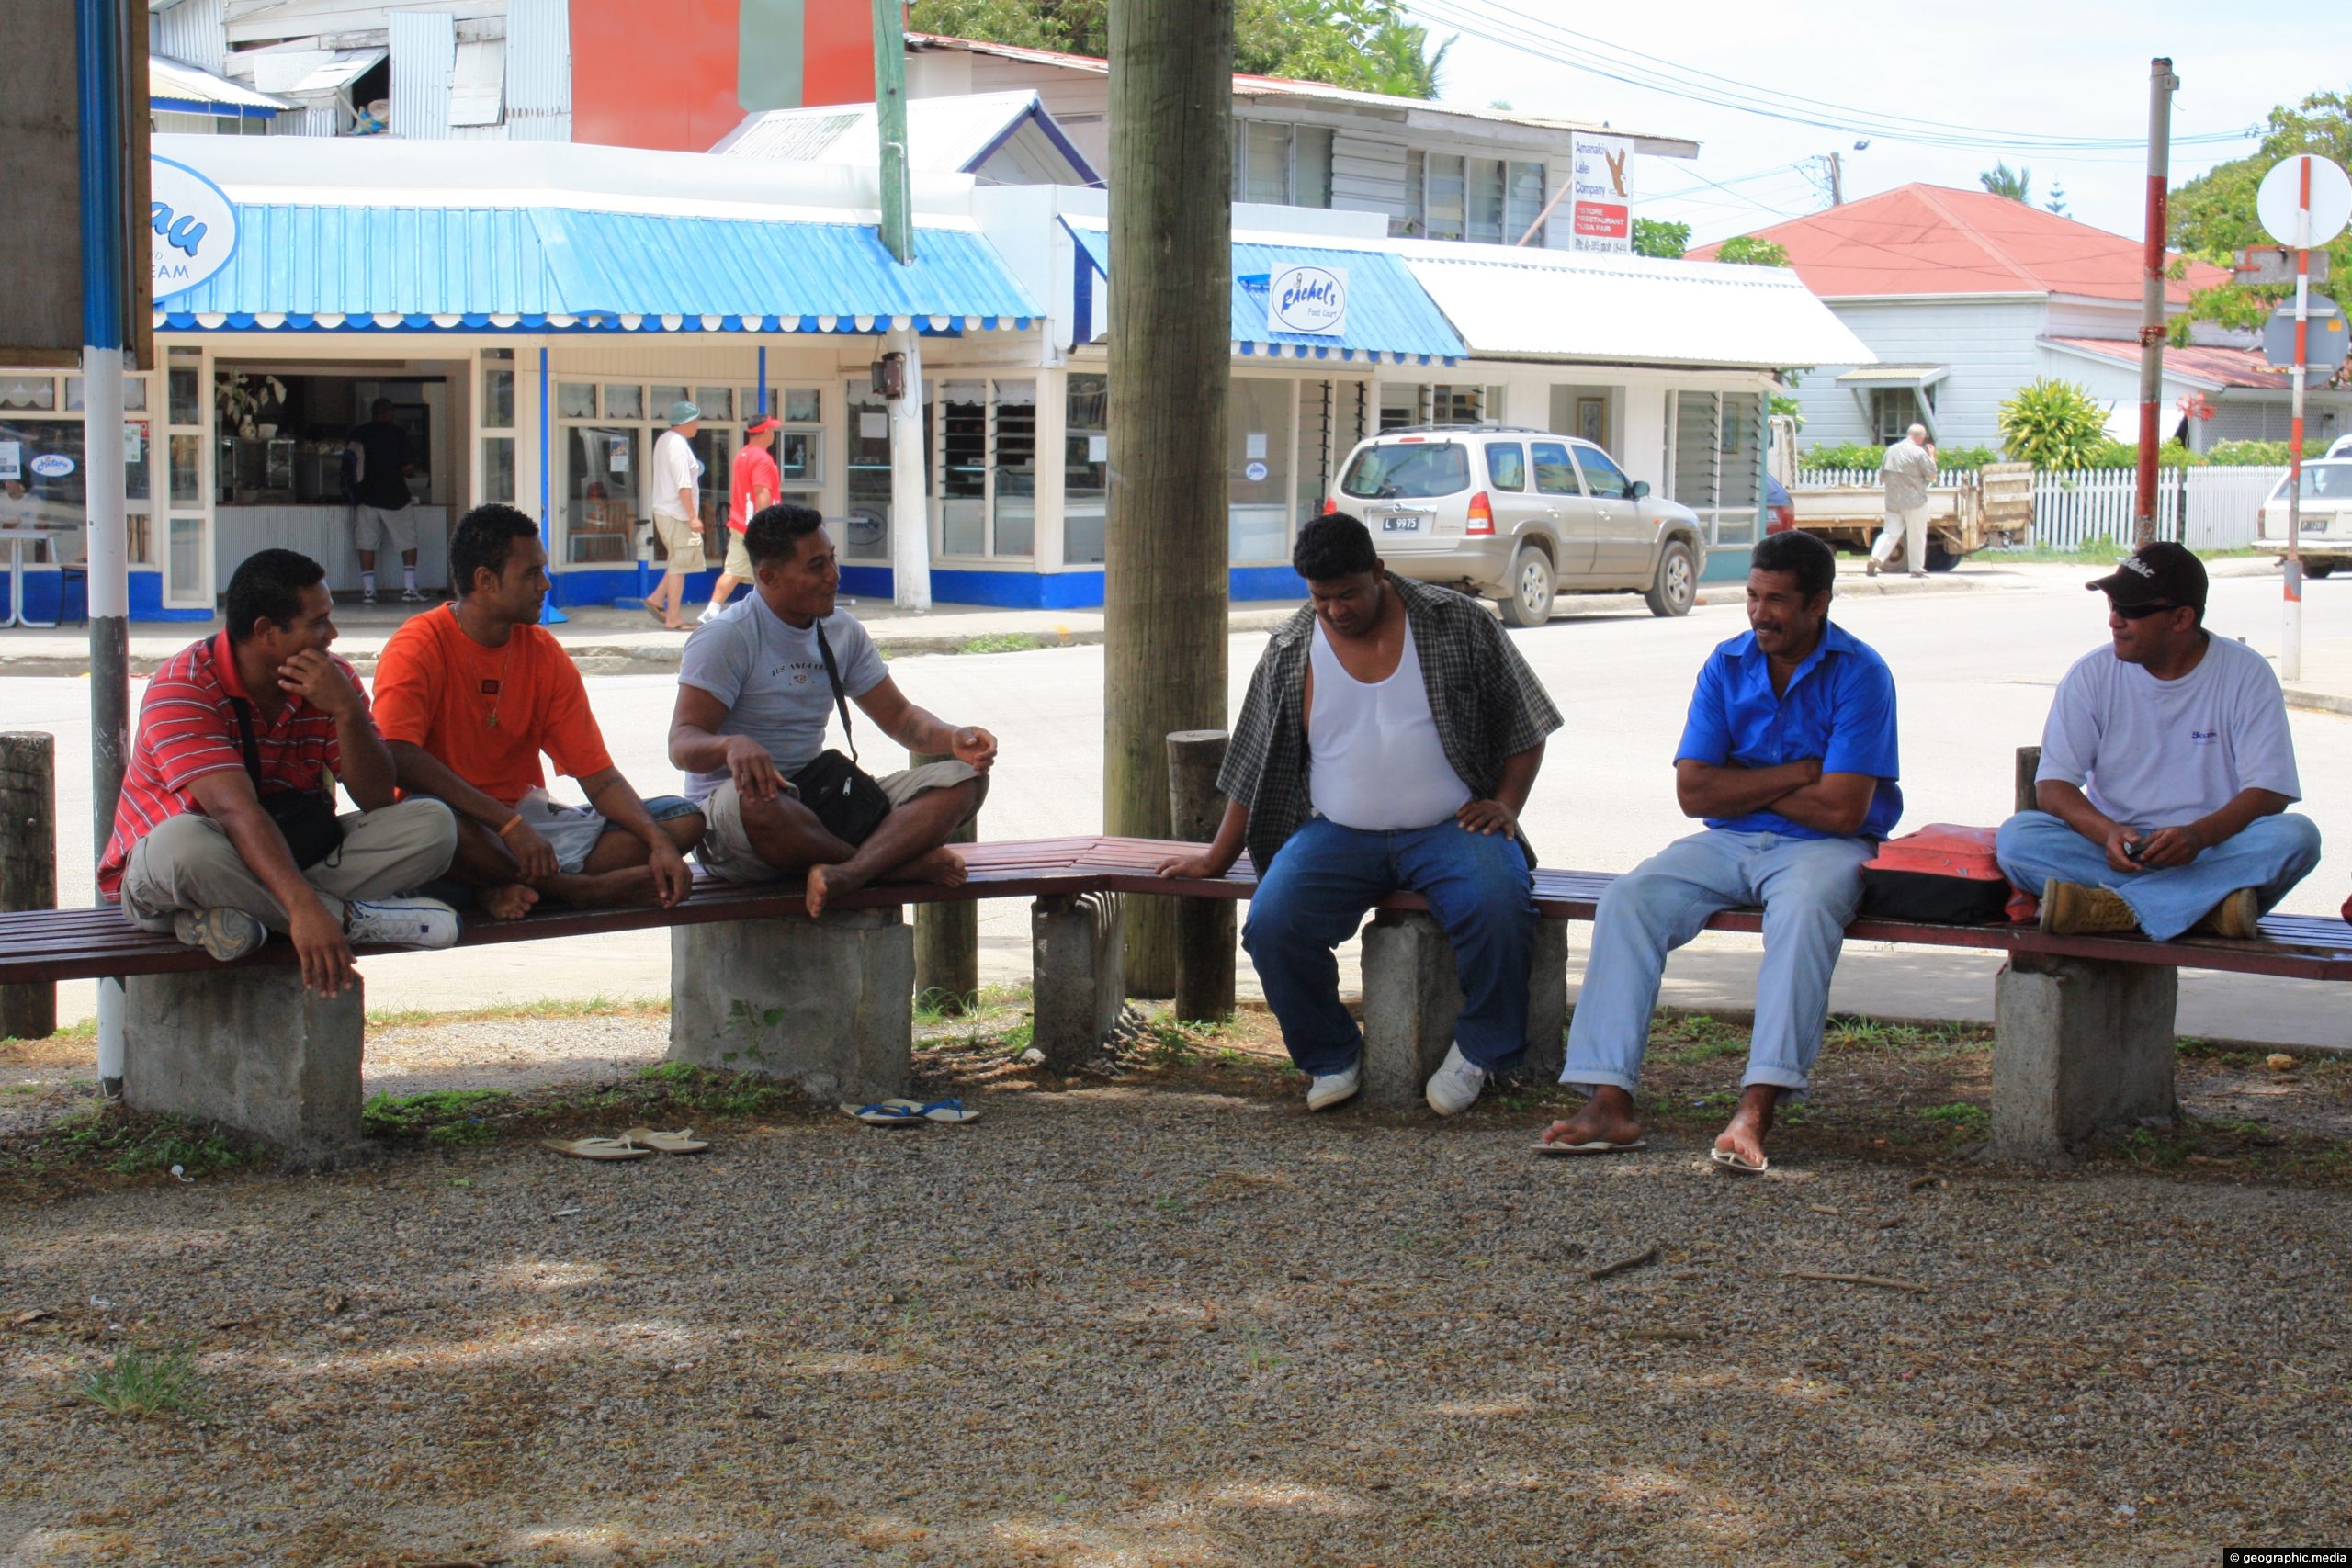 Tongan men resting during the heat of the day